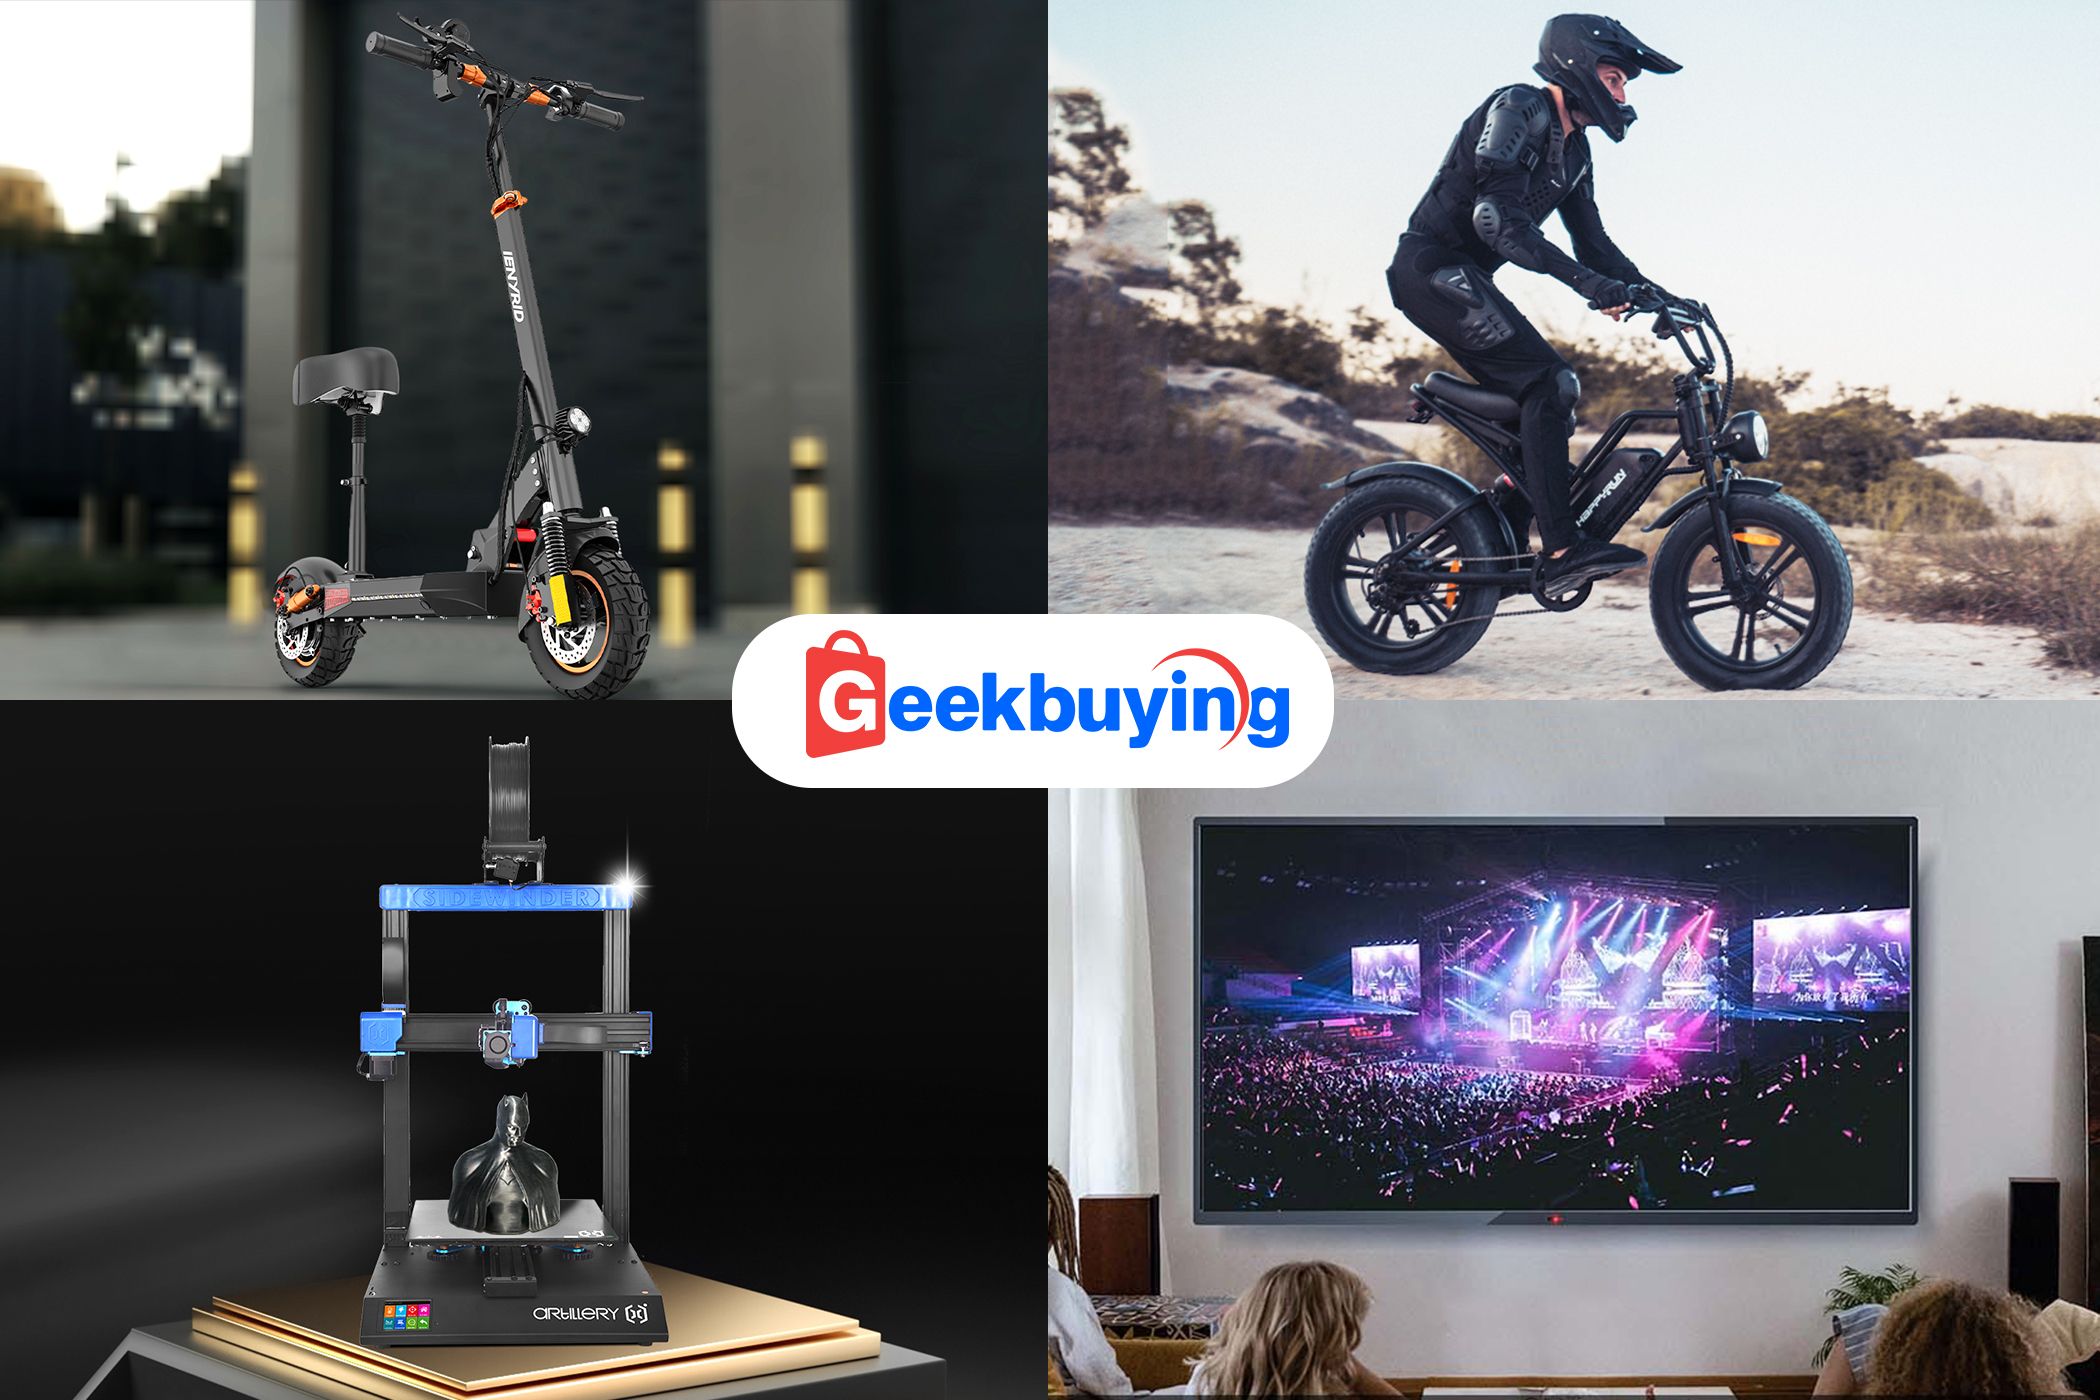 Grab exciting products at unbeatable deals at Geekbuying